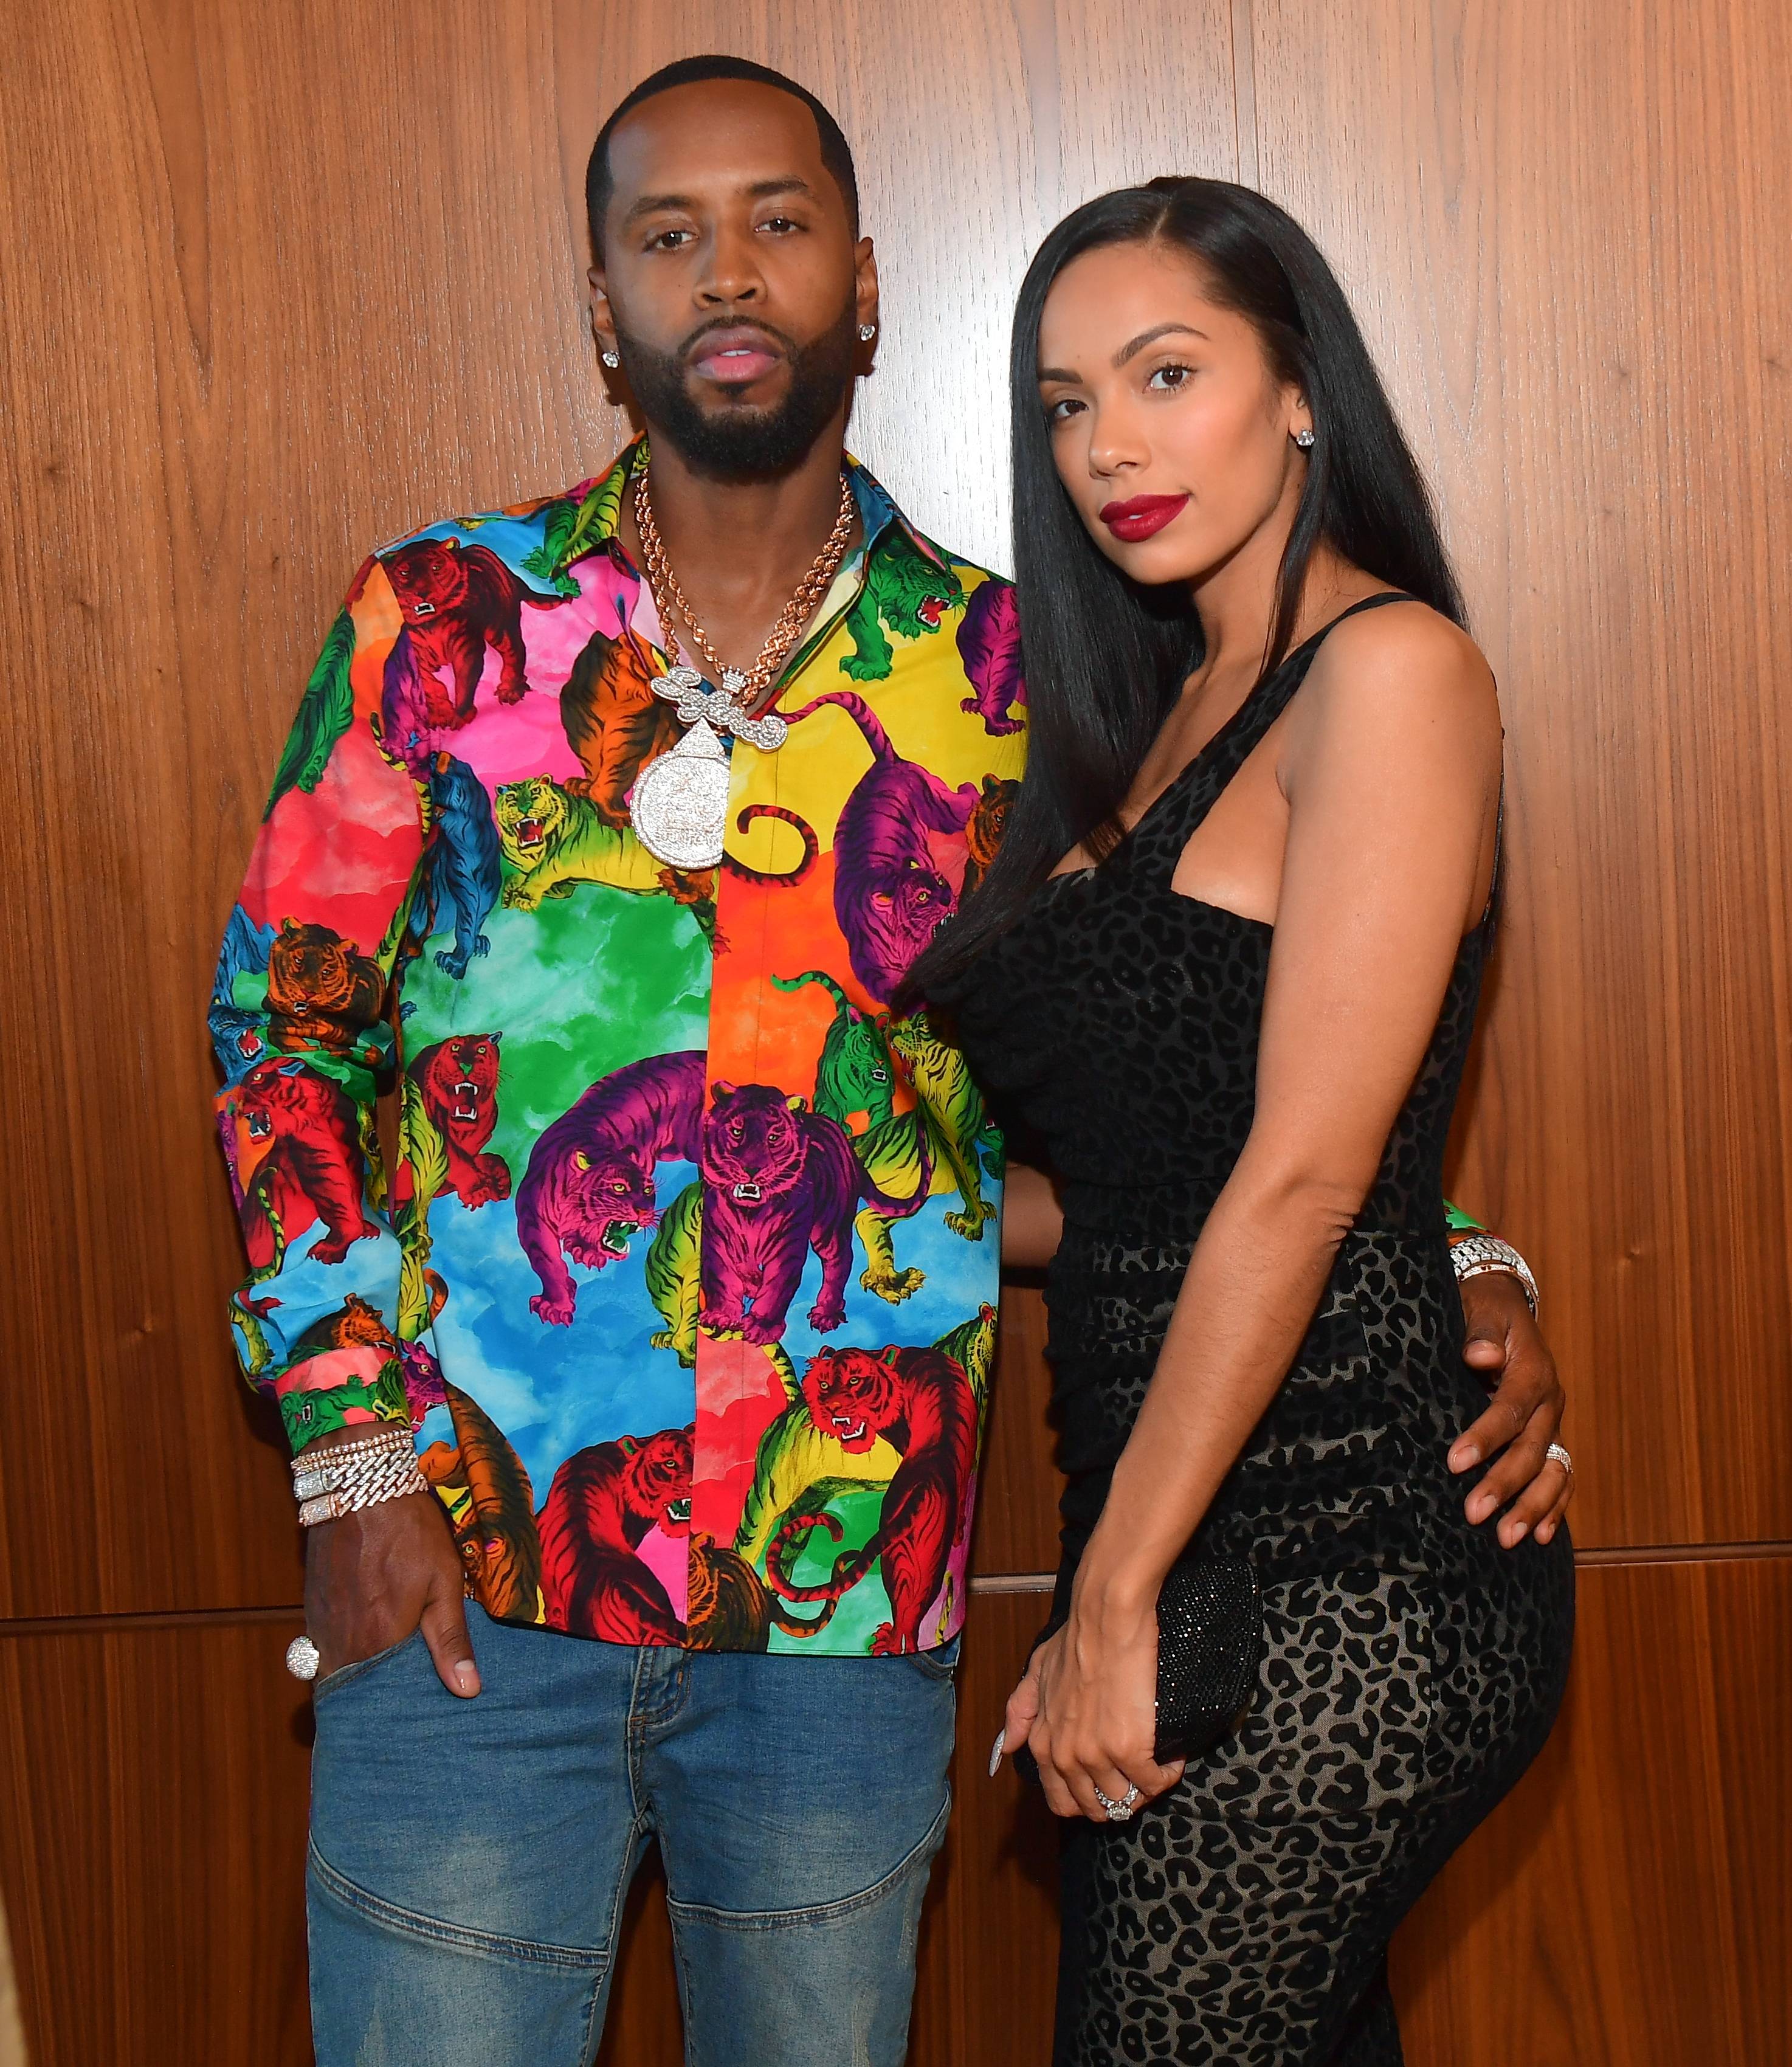 SANDY SPRINGS, GEORGIA - AUGUST 29: Safaree Samuels and Erica Mena attend The 2019 BMI R&B/Hip-Hop Awards at Sandy Springs Performing Arts Center on August 29, 2019 in Sandy Springs, Georgia(Photo by Prince Williams/Wireimage)